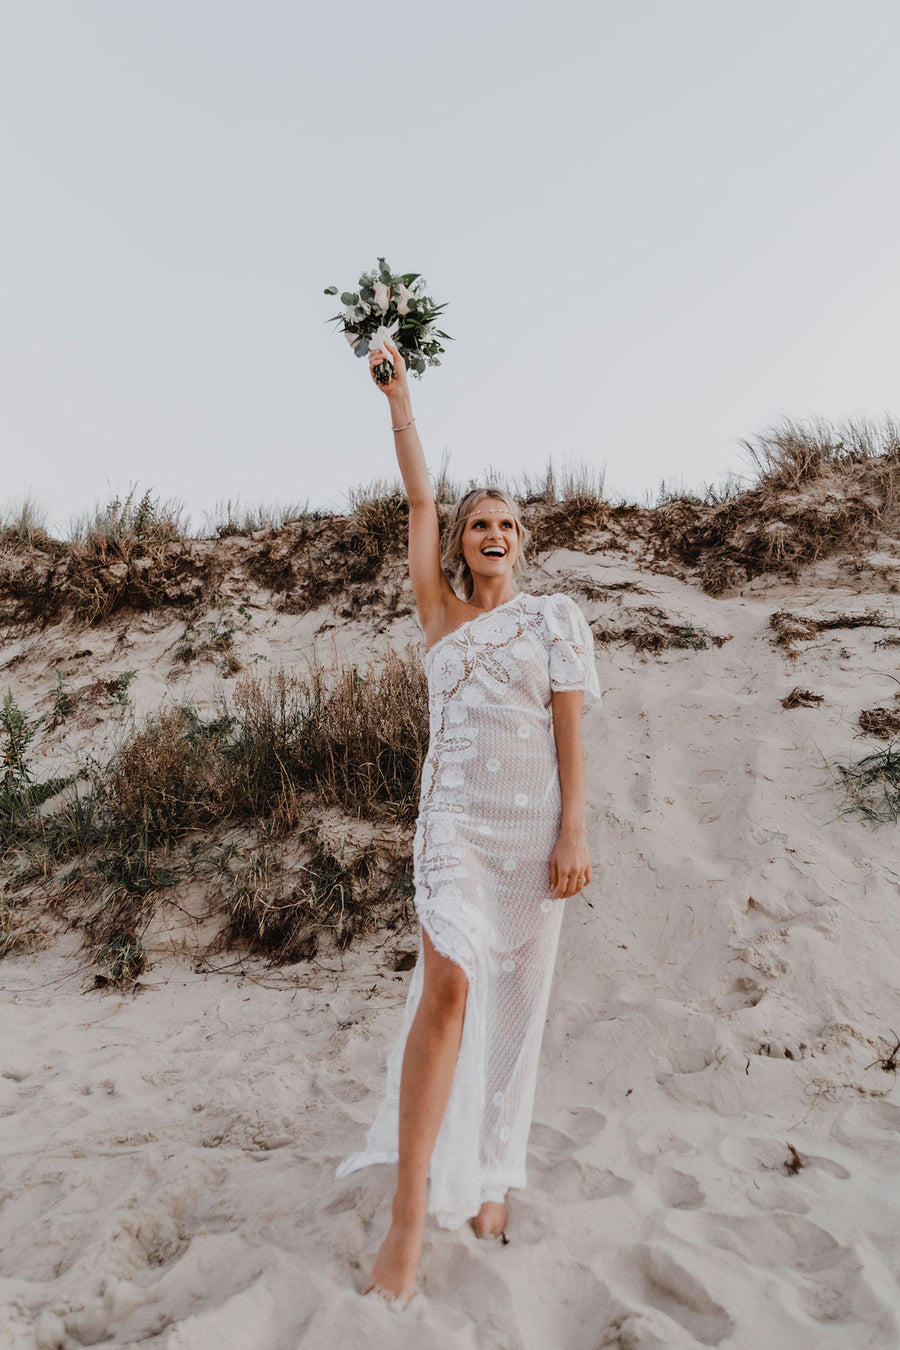 This is a photo of a bride wearing a floor length, one shoulder, maxi lace dress. There is a scalloped leg slit on the same side as the strapless top part of dress. The dress is lined to the leg slit. She smiles as she stands on a beach holding her bouquet of flowers.